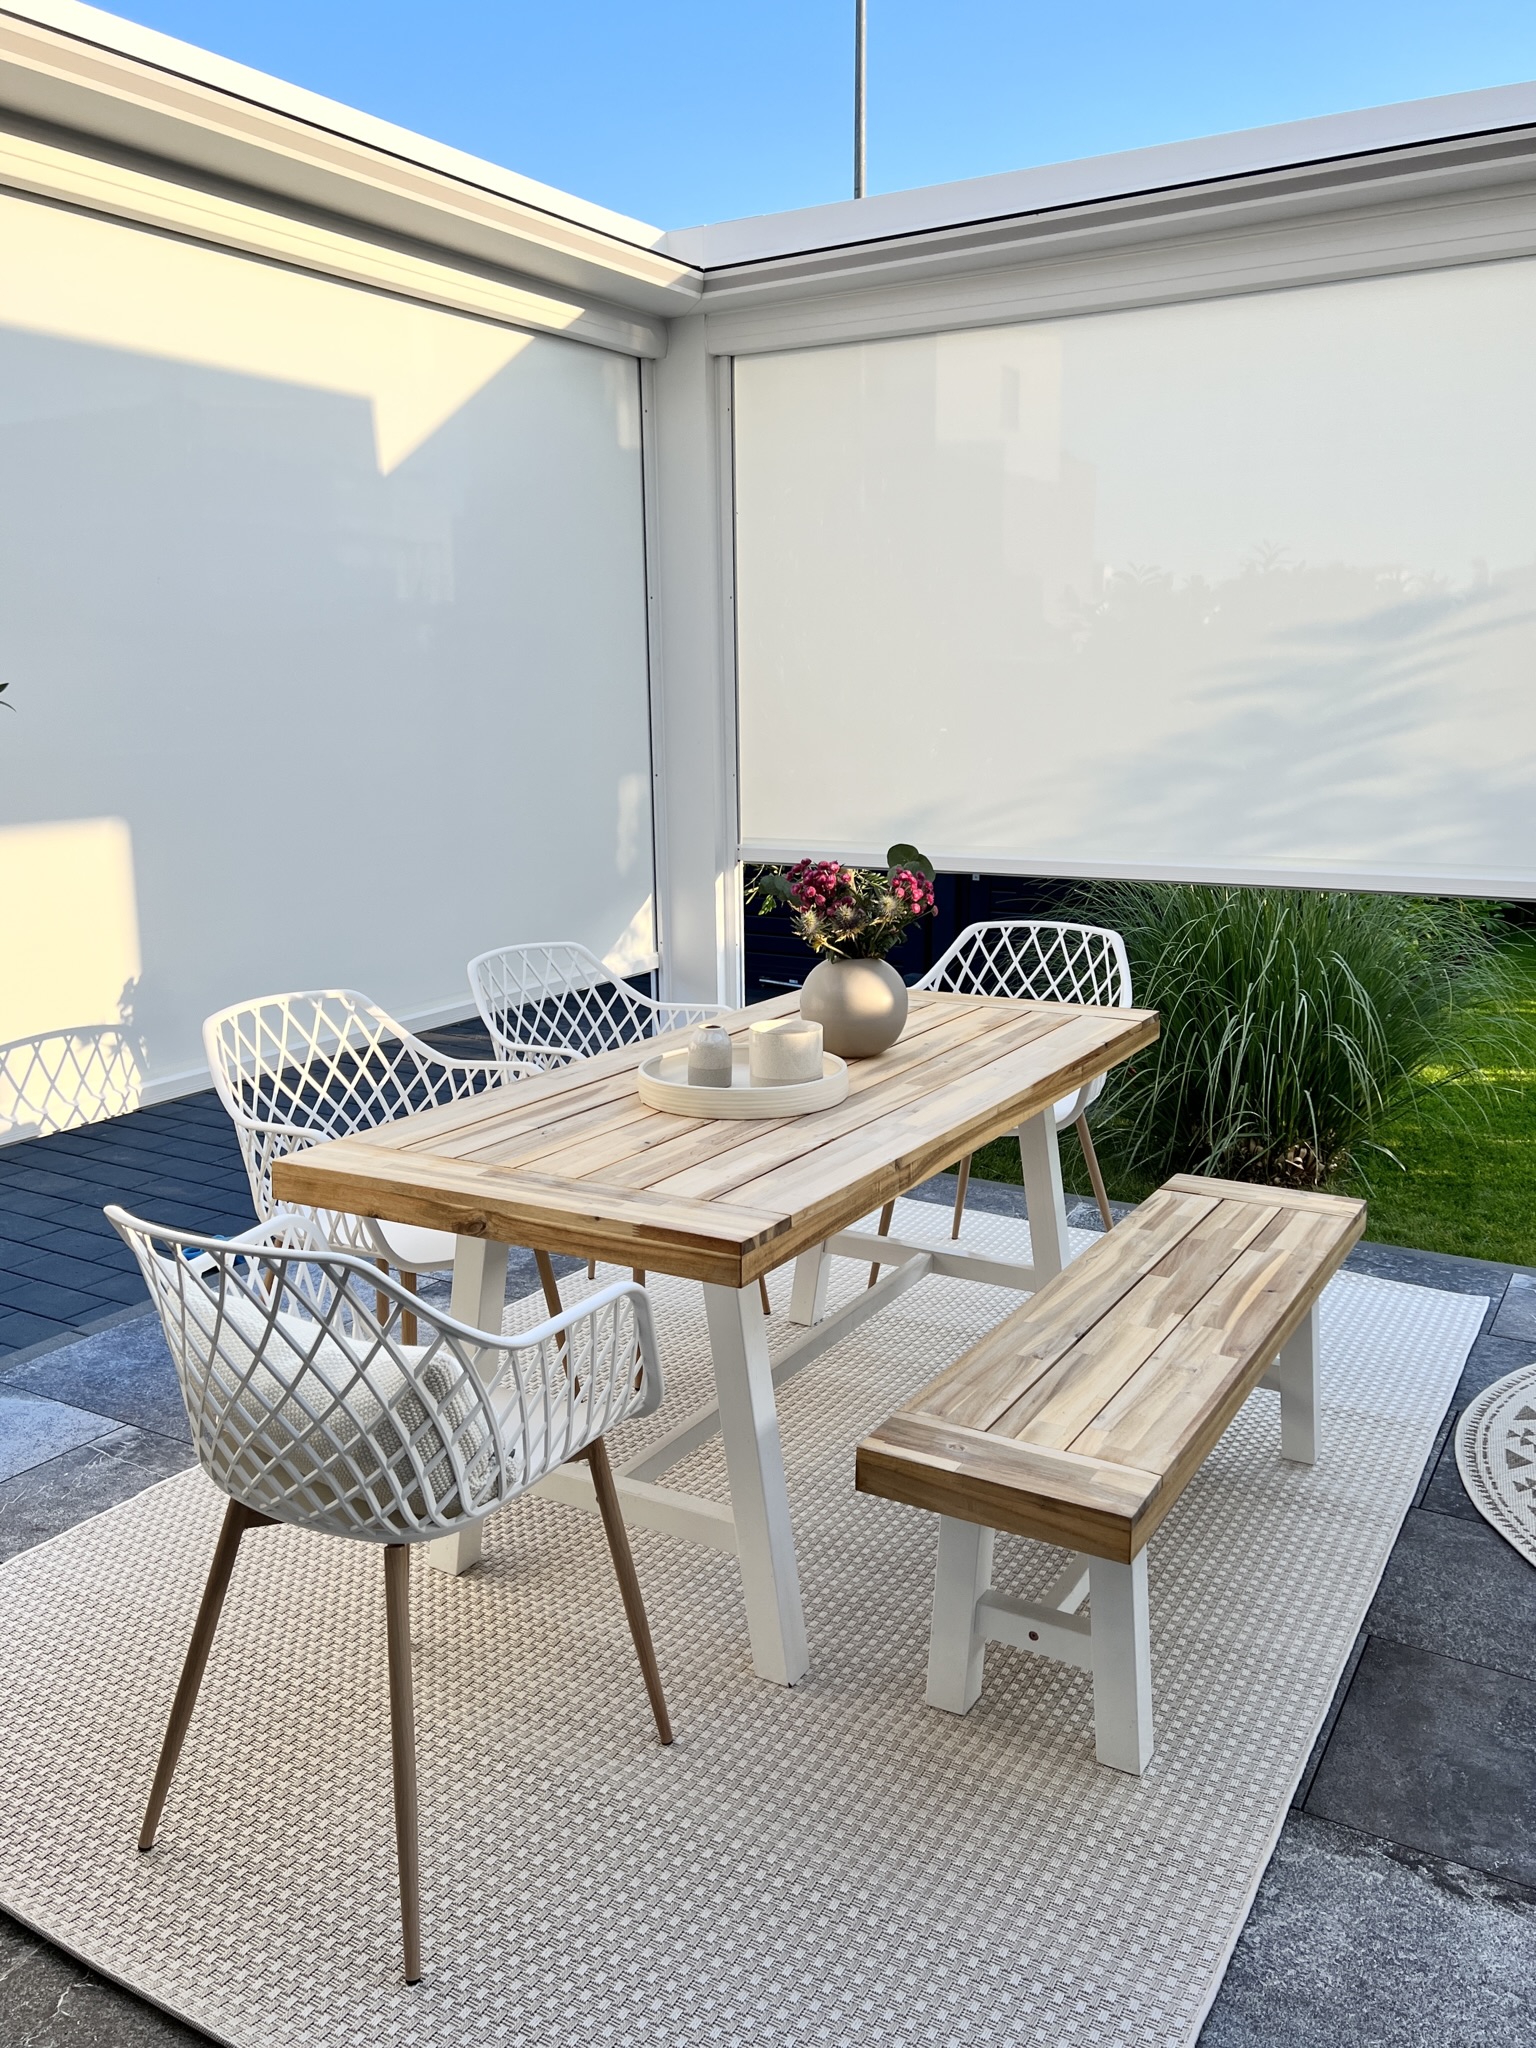 6 Seater Acacia Wood Garden Dining Set White and Brown SCANIA_831762